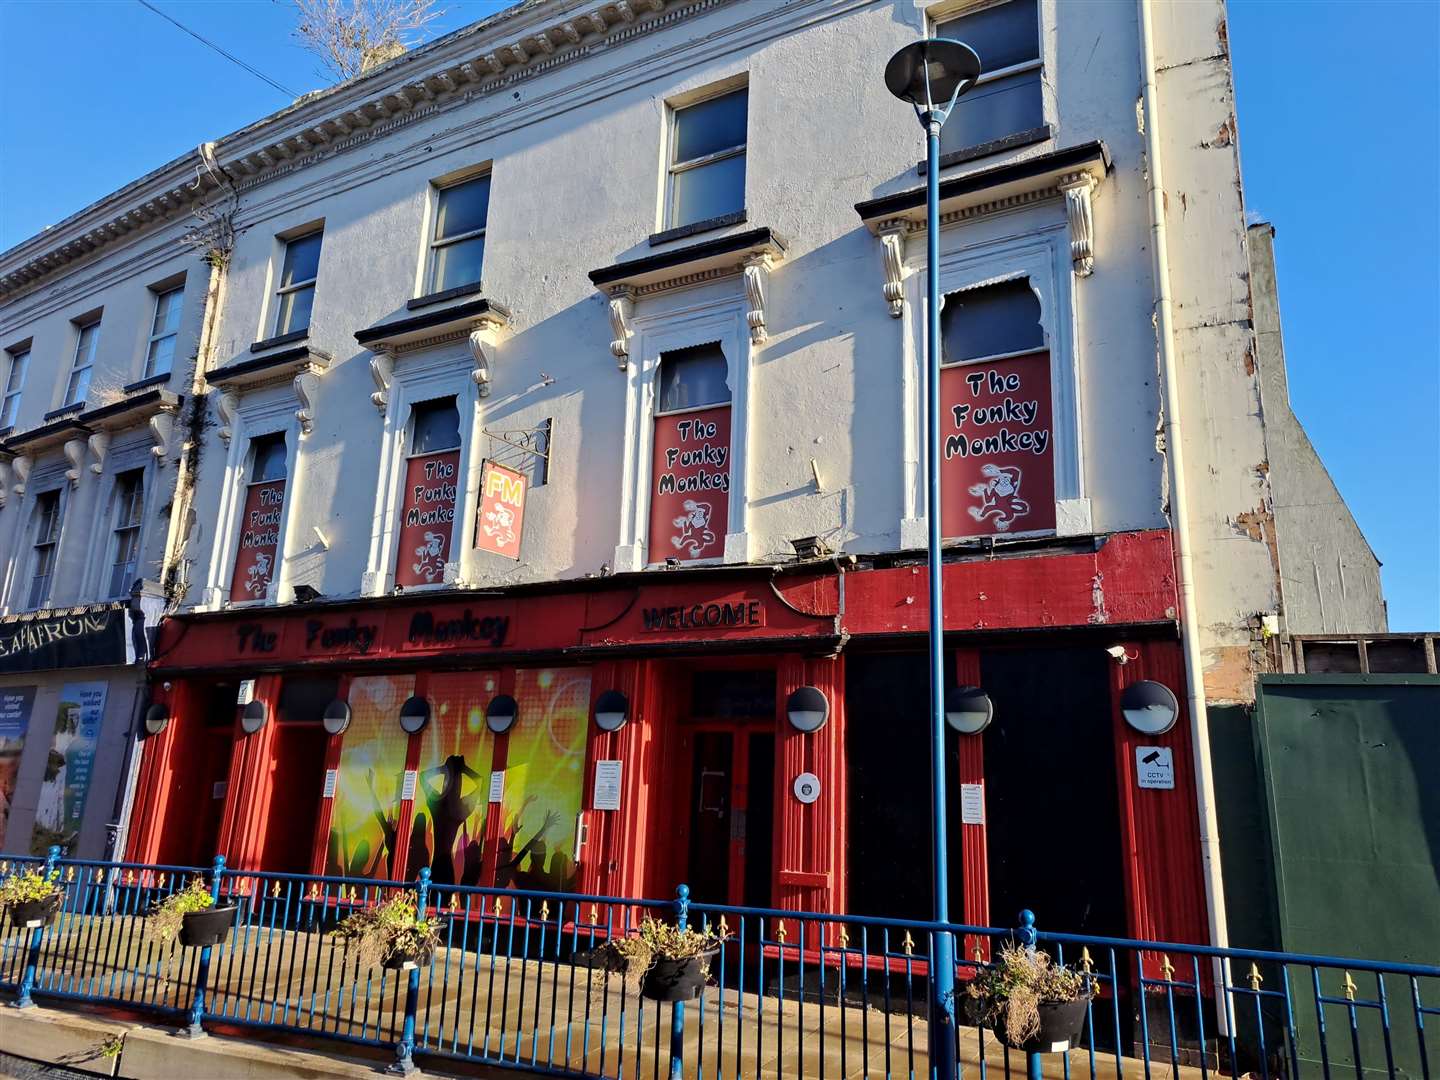 The former Funky Monkey nightclub building has also been bought by DDC